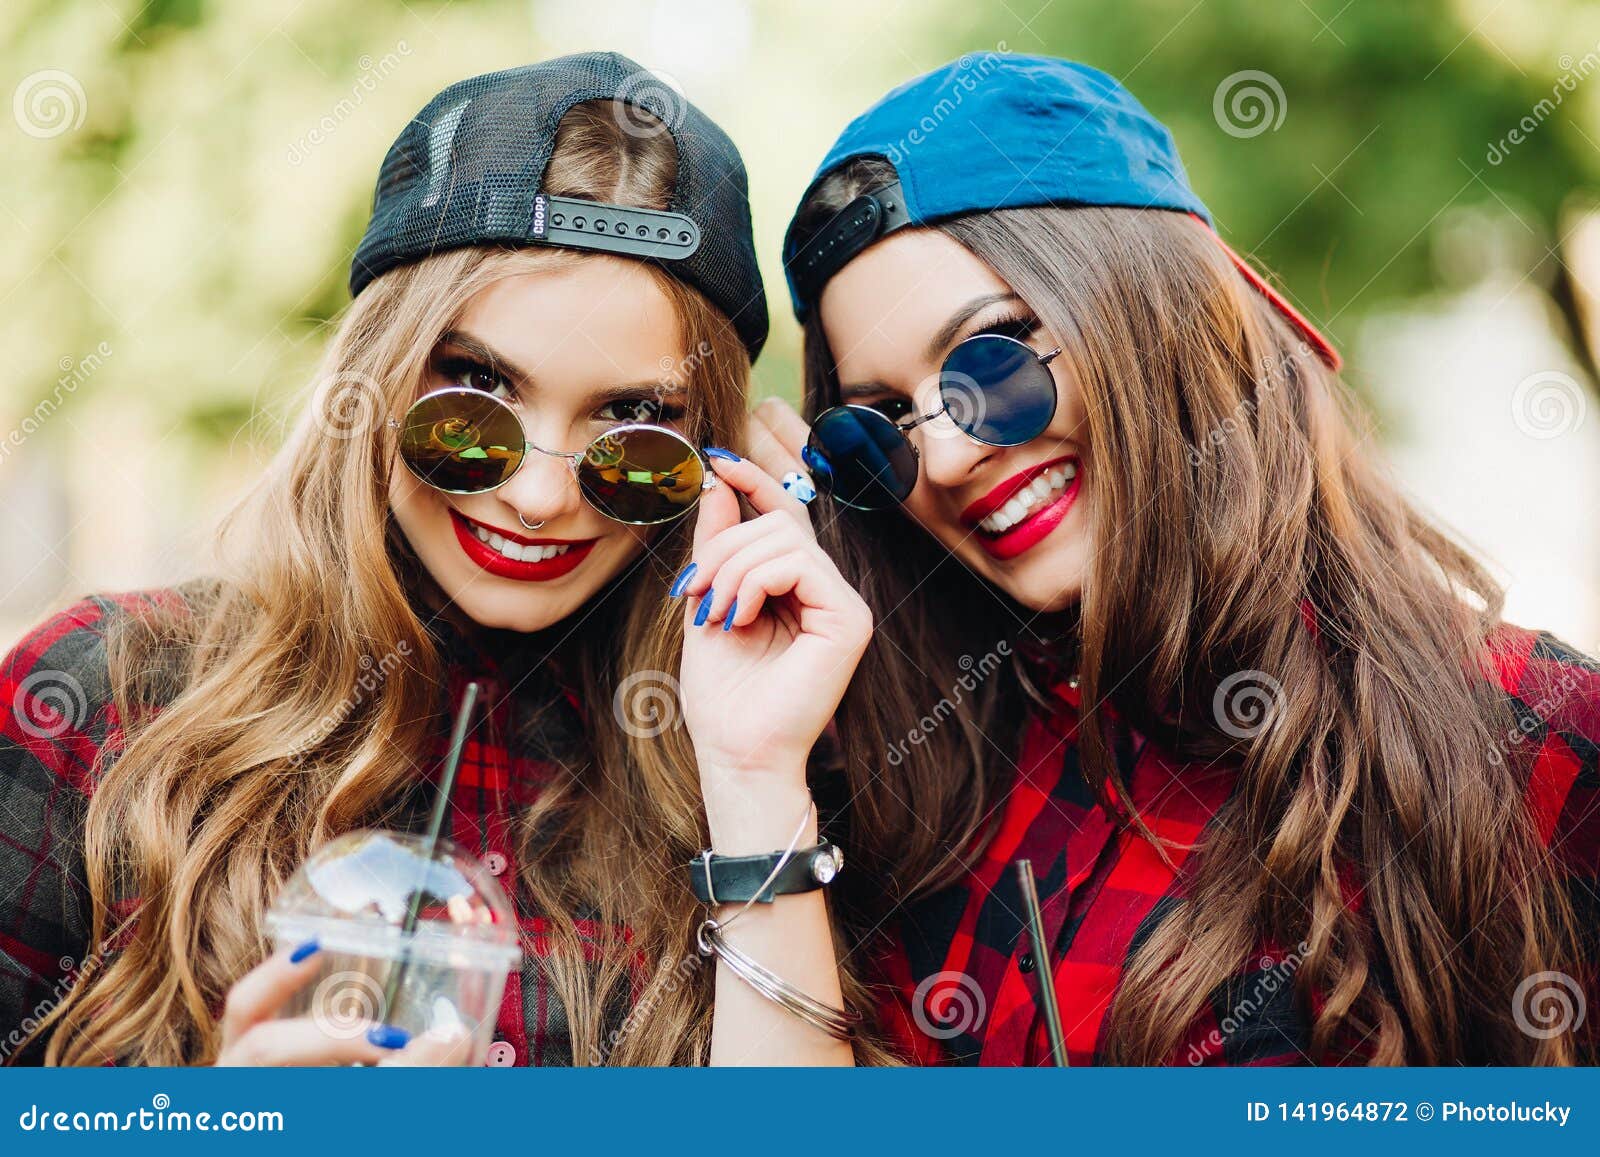 Beautiful Girls Blonde and Brunette Having Fun Together. Stock Photo ...